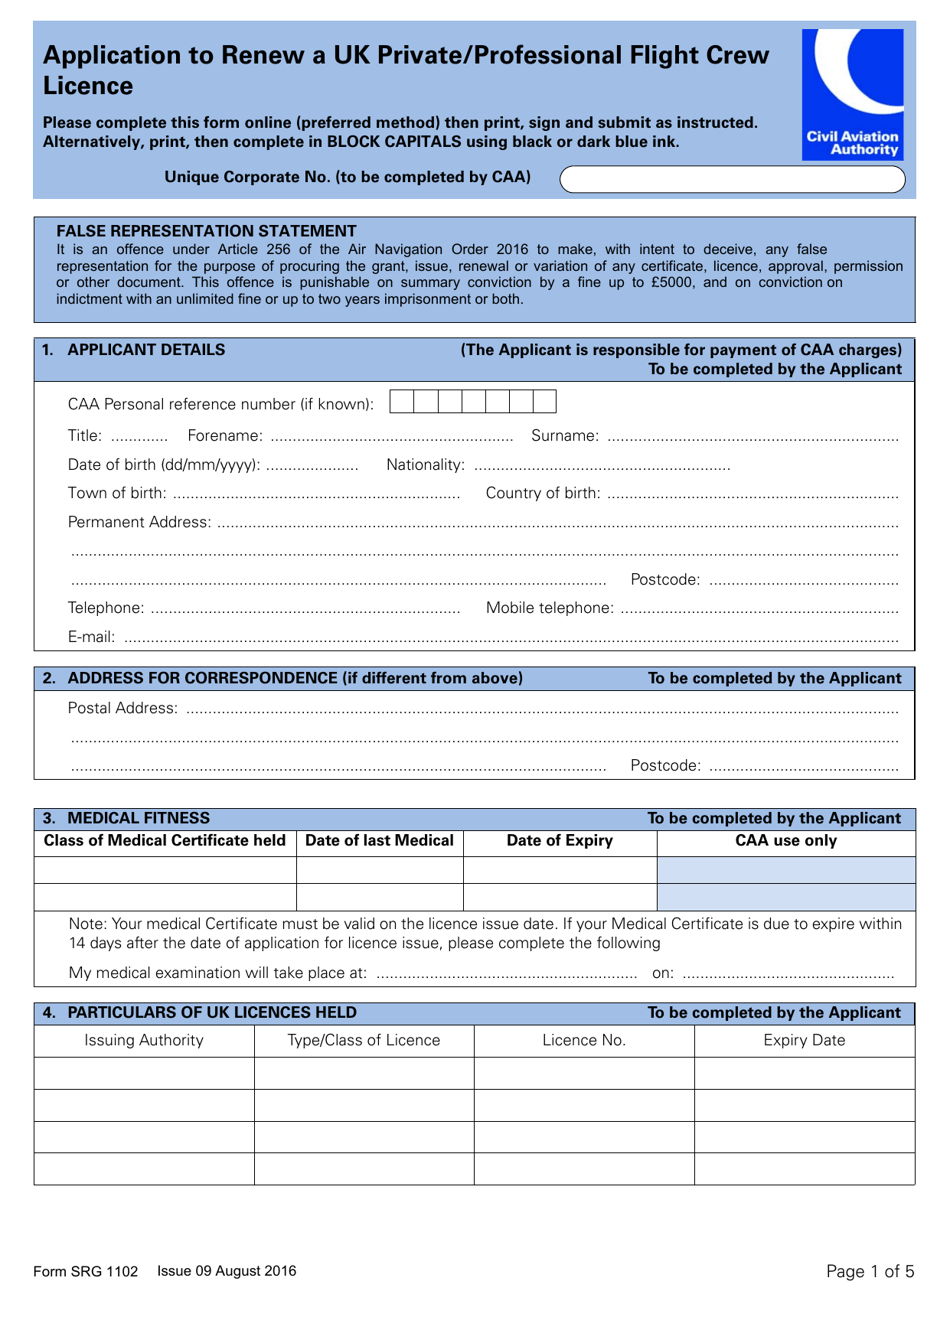 Form SRG1102 Application to Renew a UK Private/Professional Flight Crew Licence - United Kingdom, Page 1